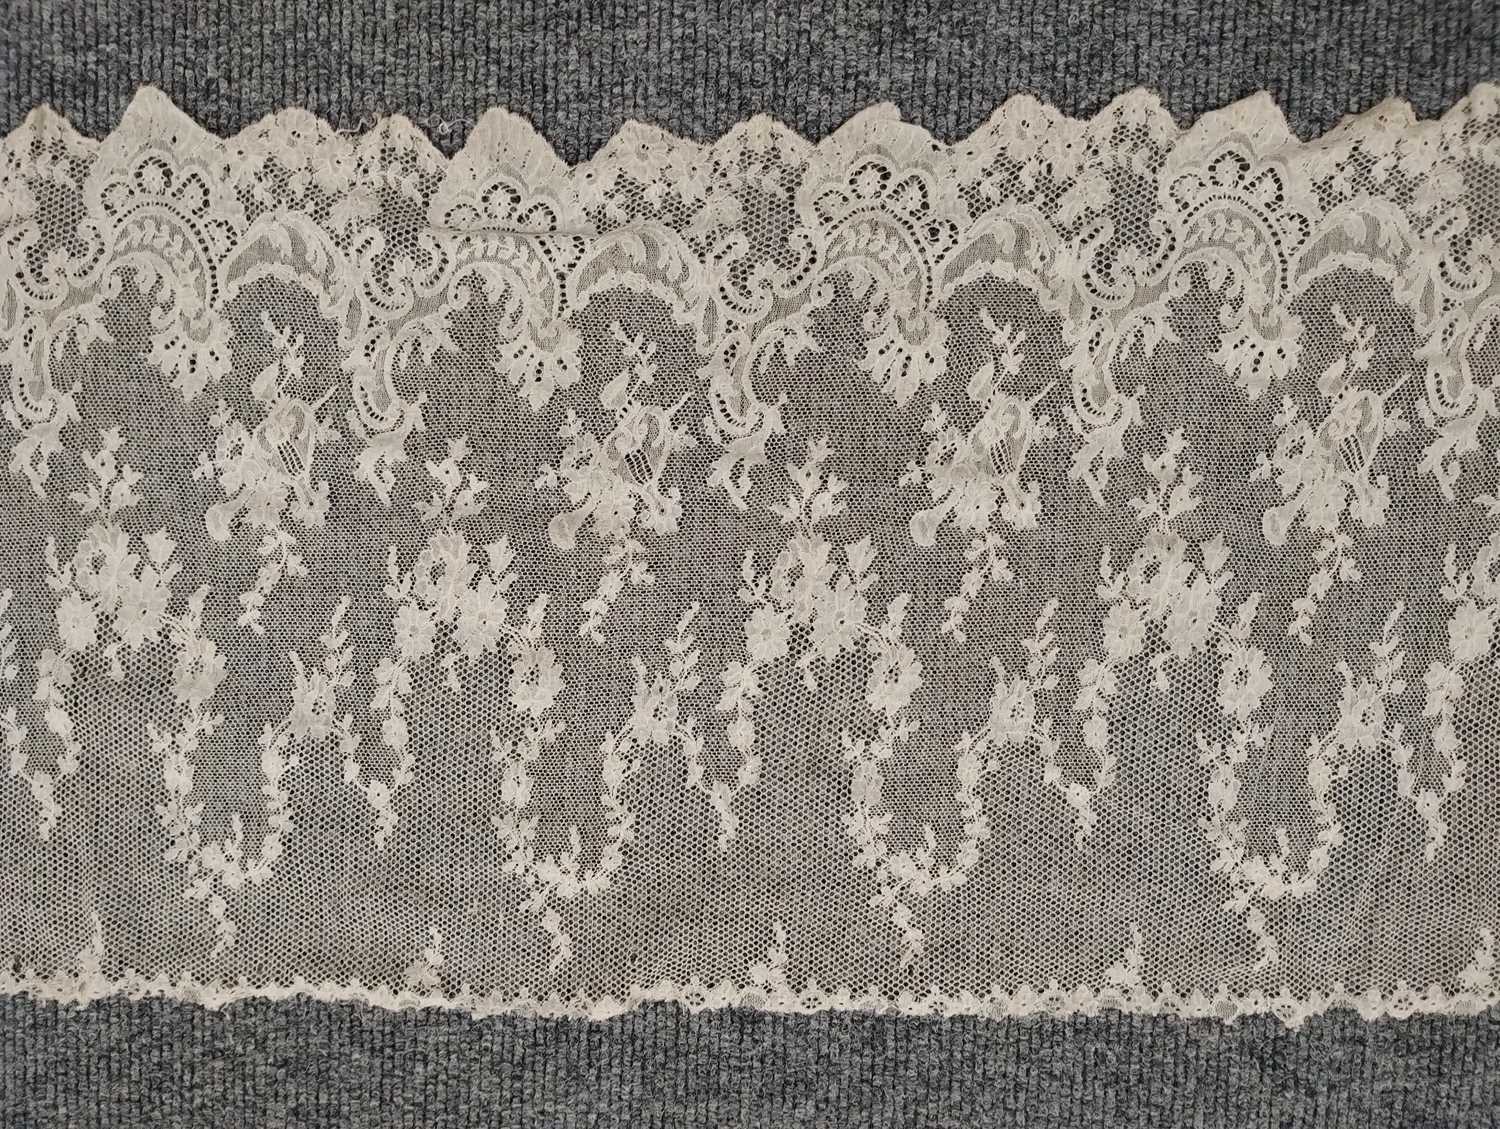 Early 20th Century Lace comprising a flounce with appliquéd flower heads and motifs within a - Image 8 of 32